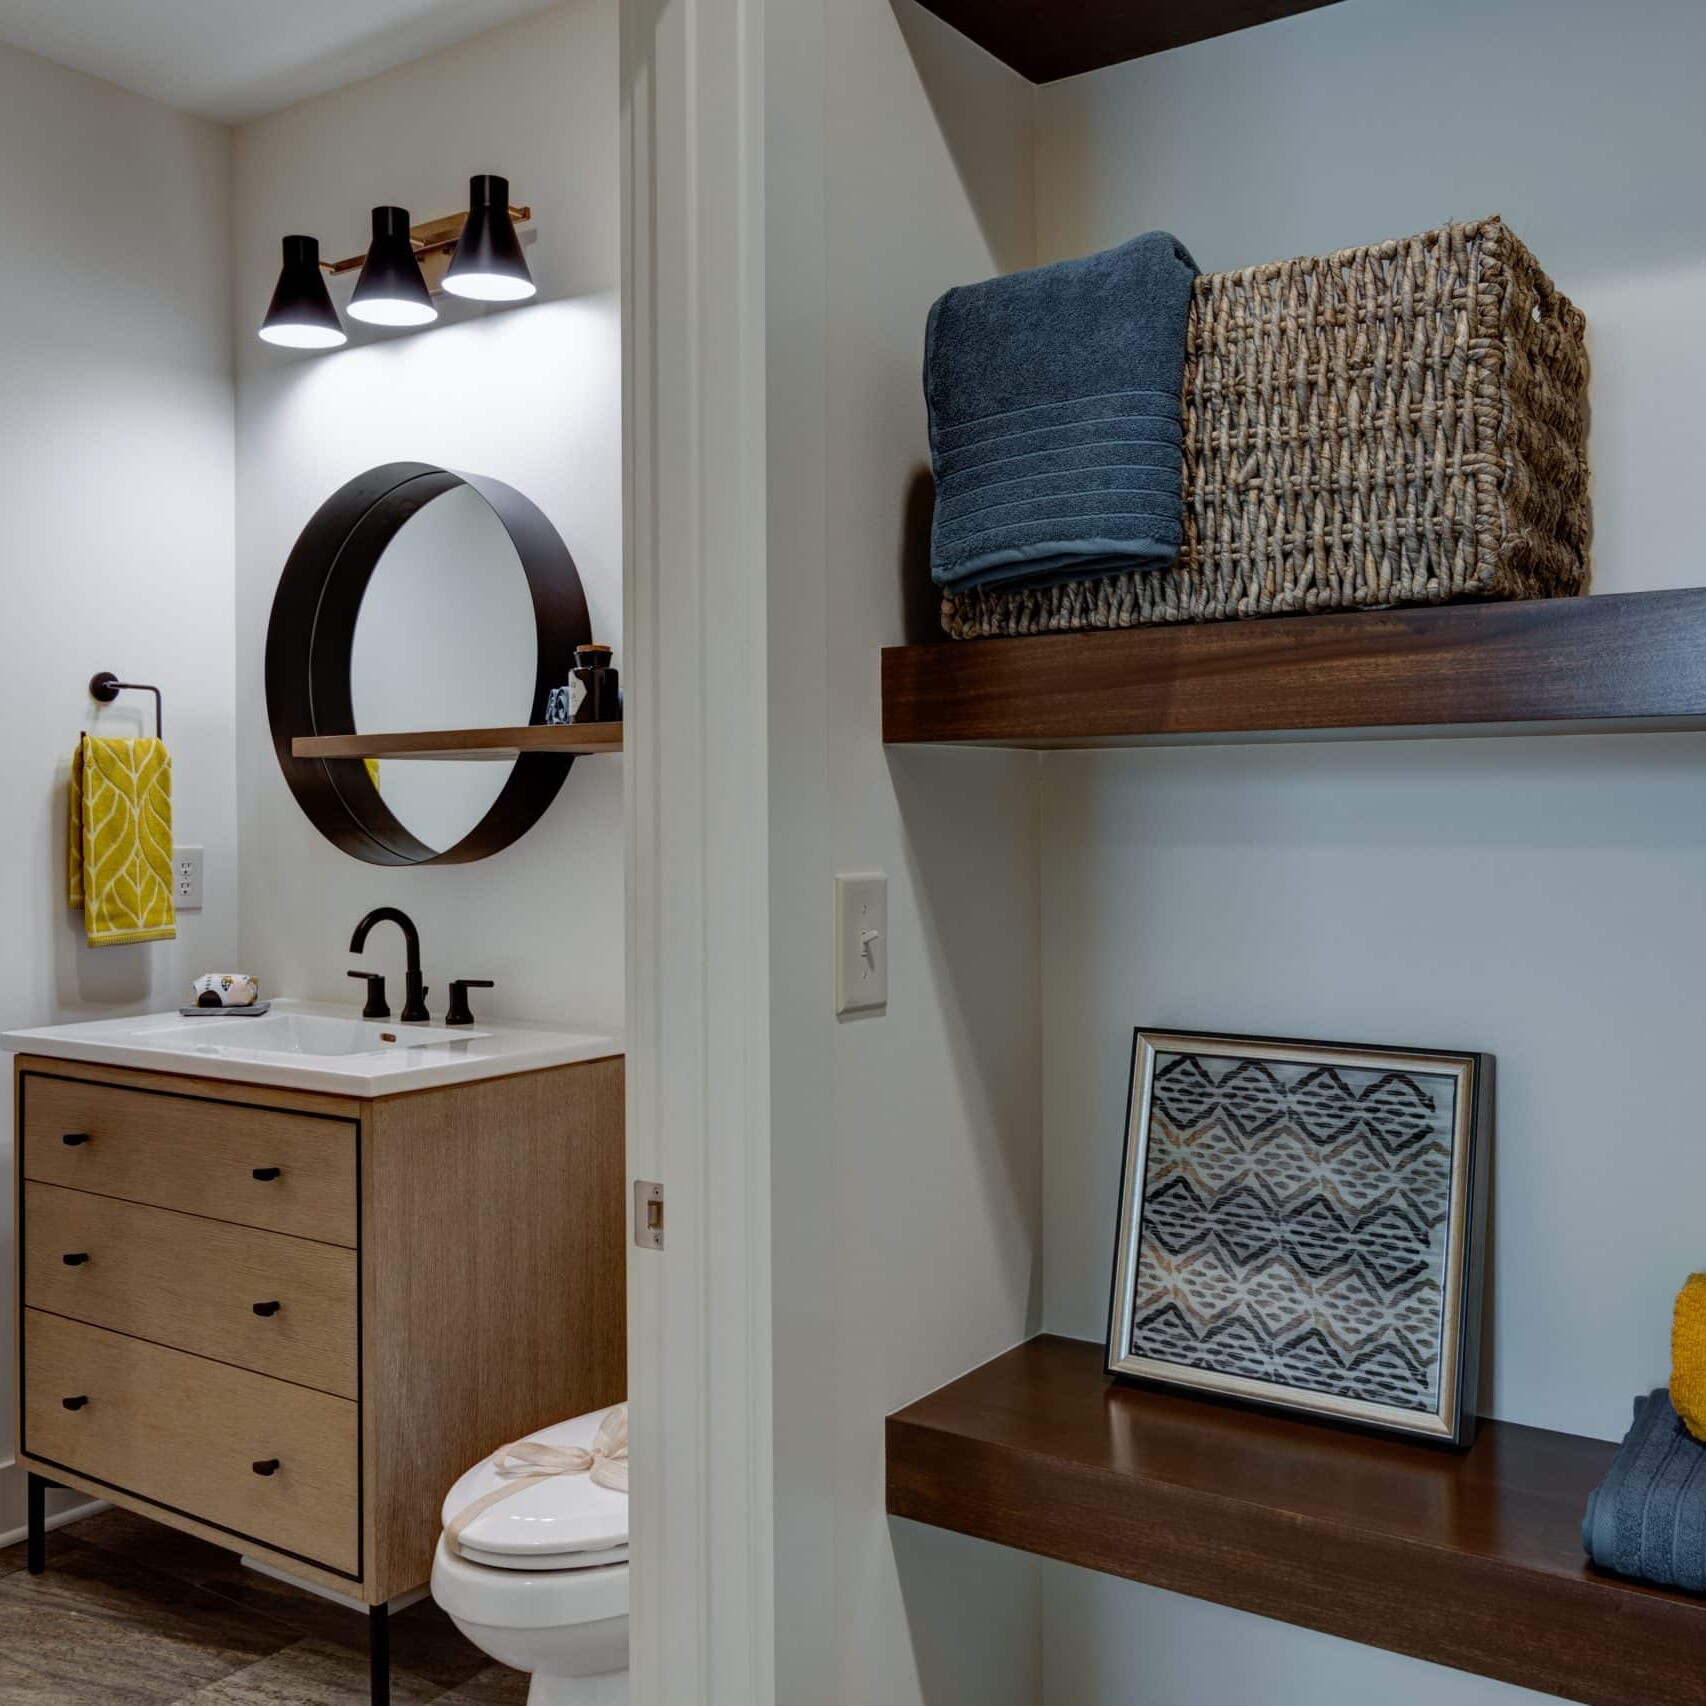 A bathroom with wooden shelves and a mirror.